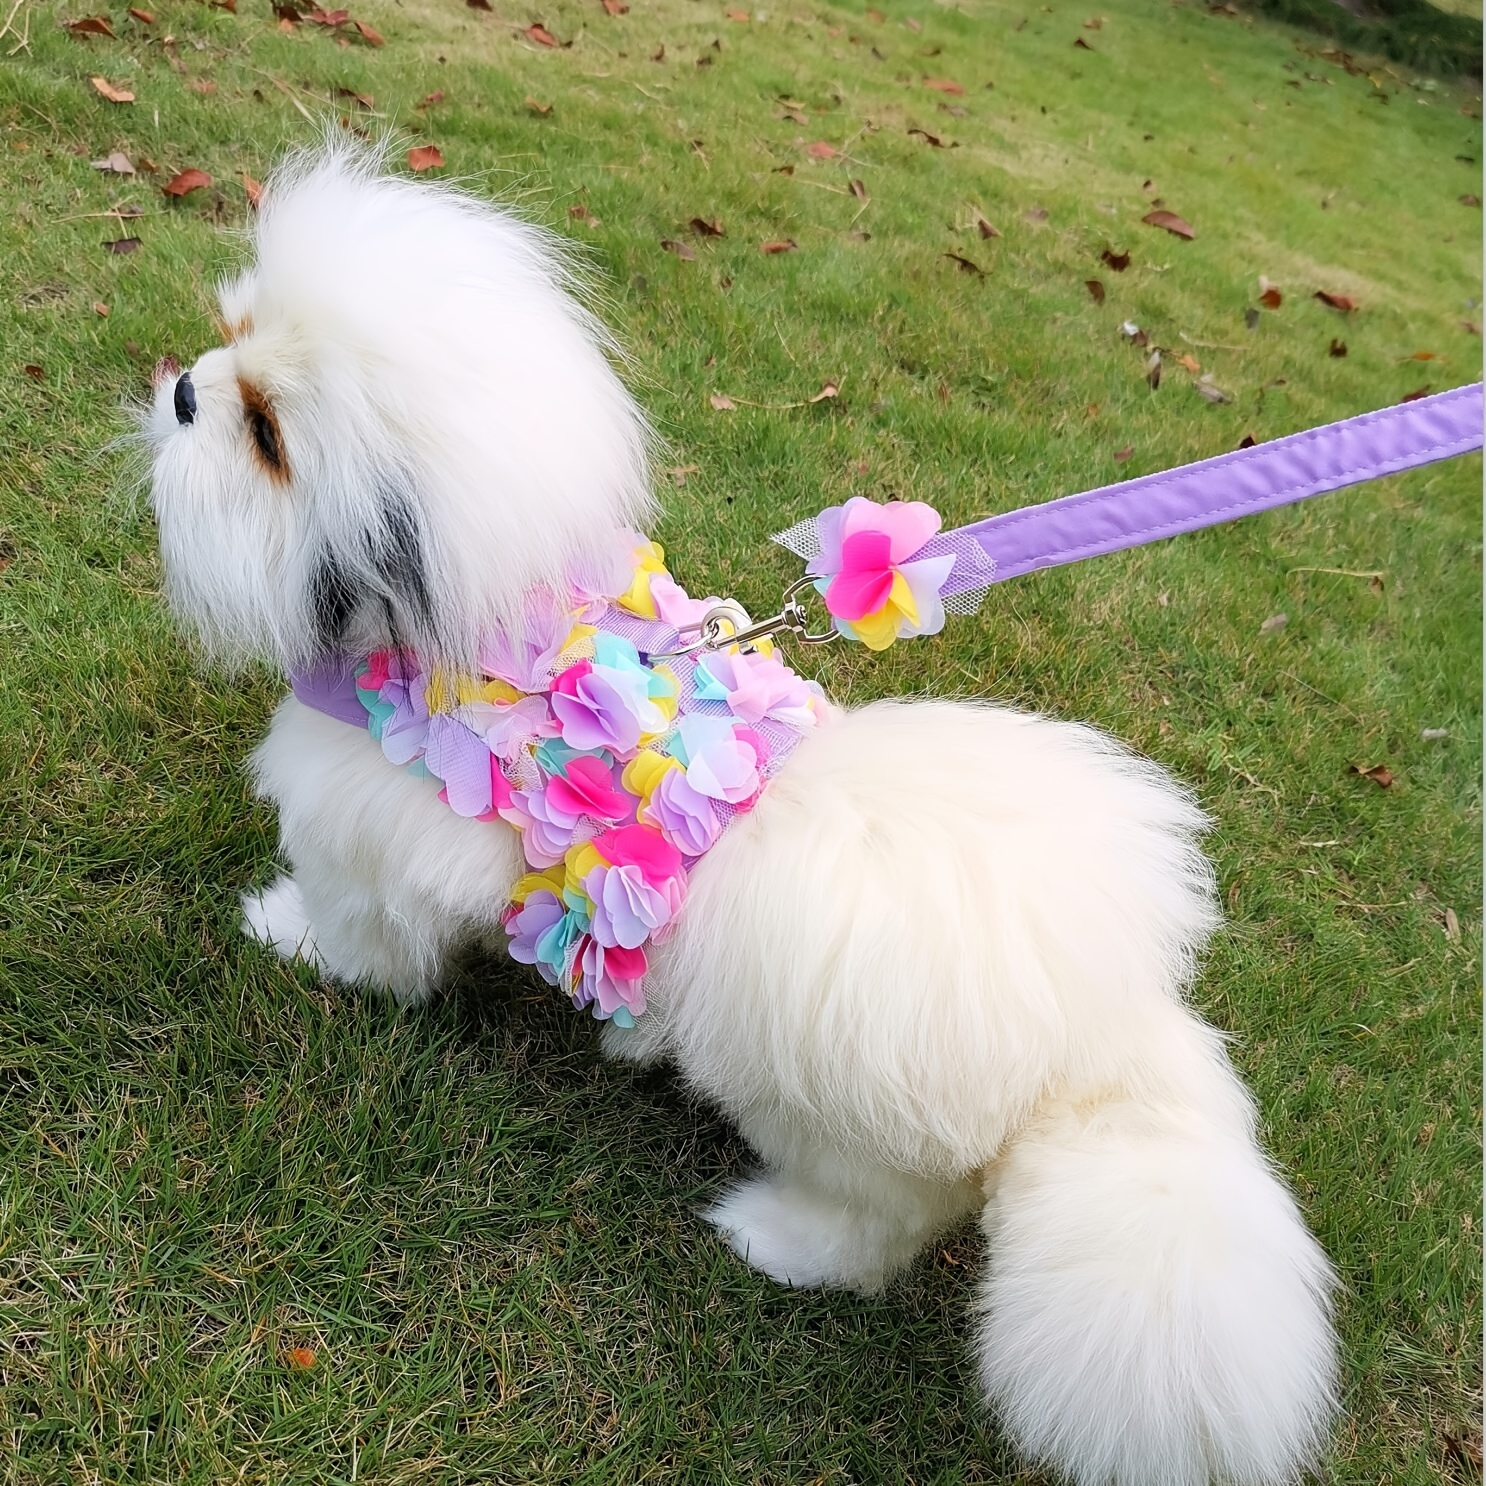 

Floral Lace Pet Harness And Leash Set For Small Dogs And Cats - Comfortable And Stylish Cat Vest With Matching Leash